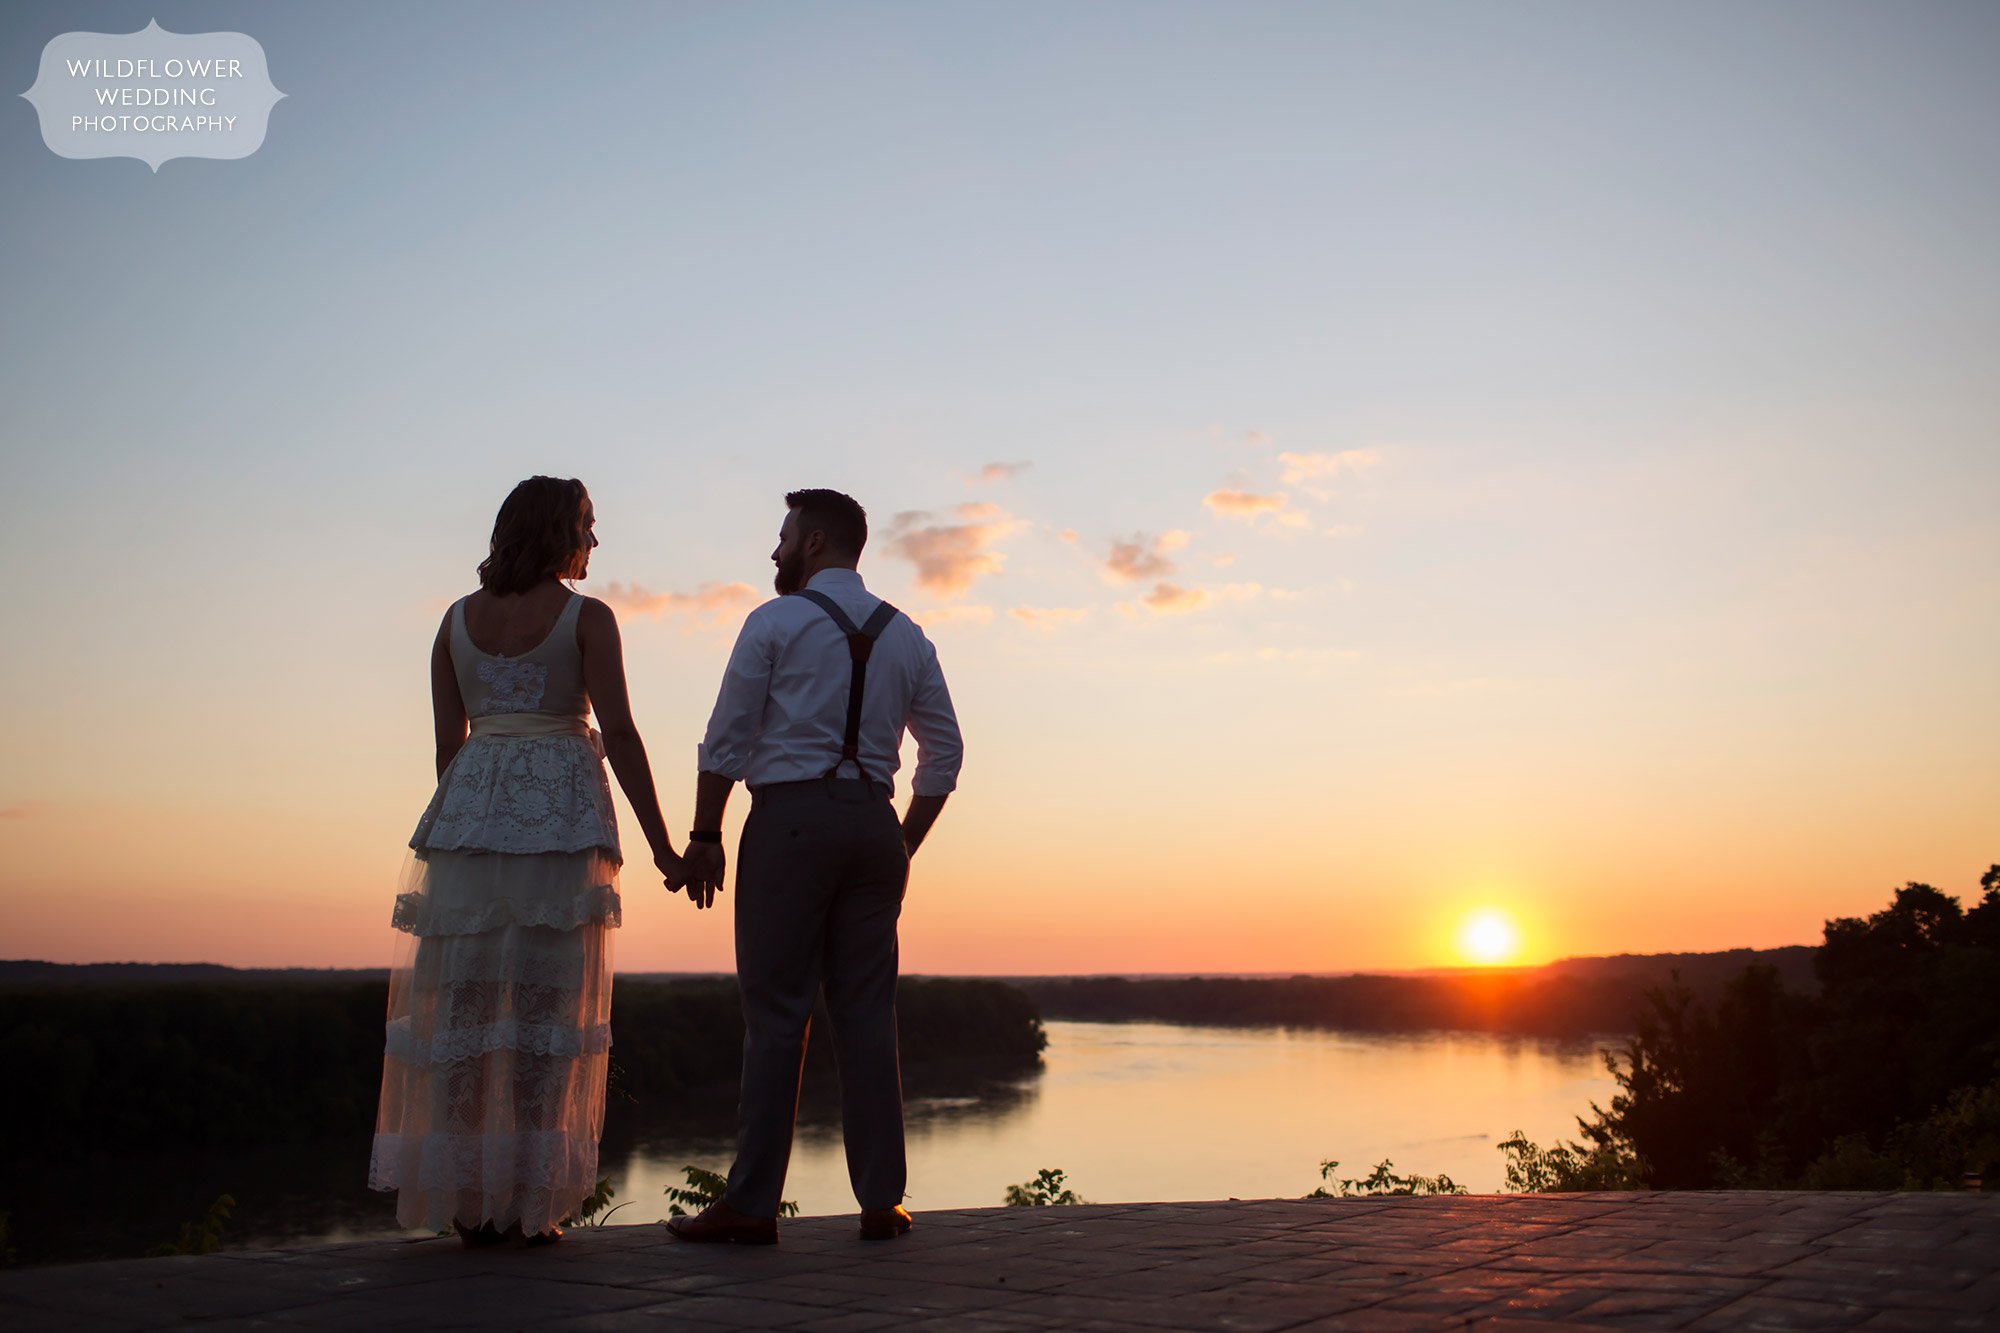 bride and groom silhouette on blufftop at les bourgeois at sunset over missouri river